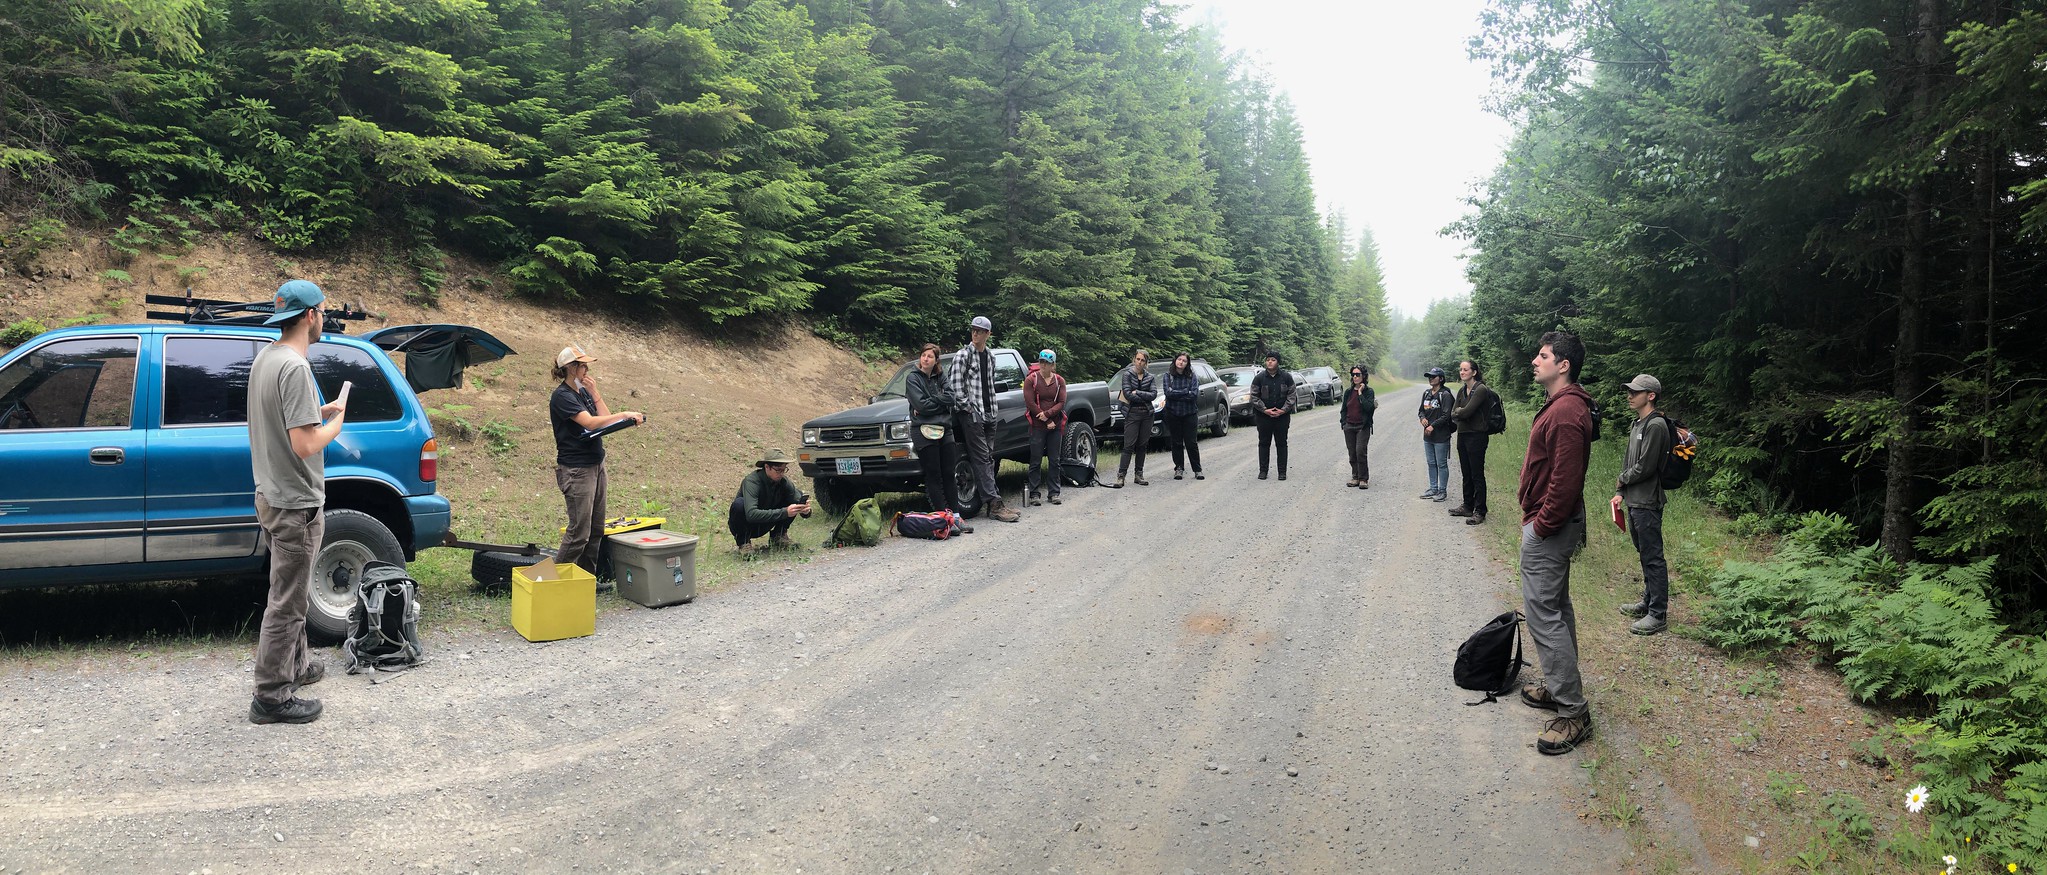 A group of 14 people standing in a semi-circle on a gravel road with vehicles parked behind them.